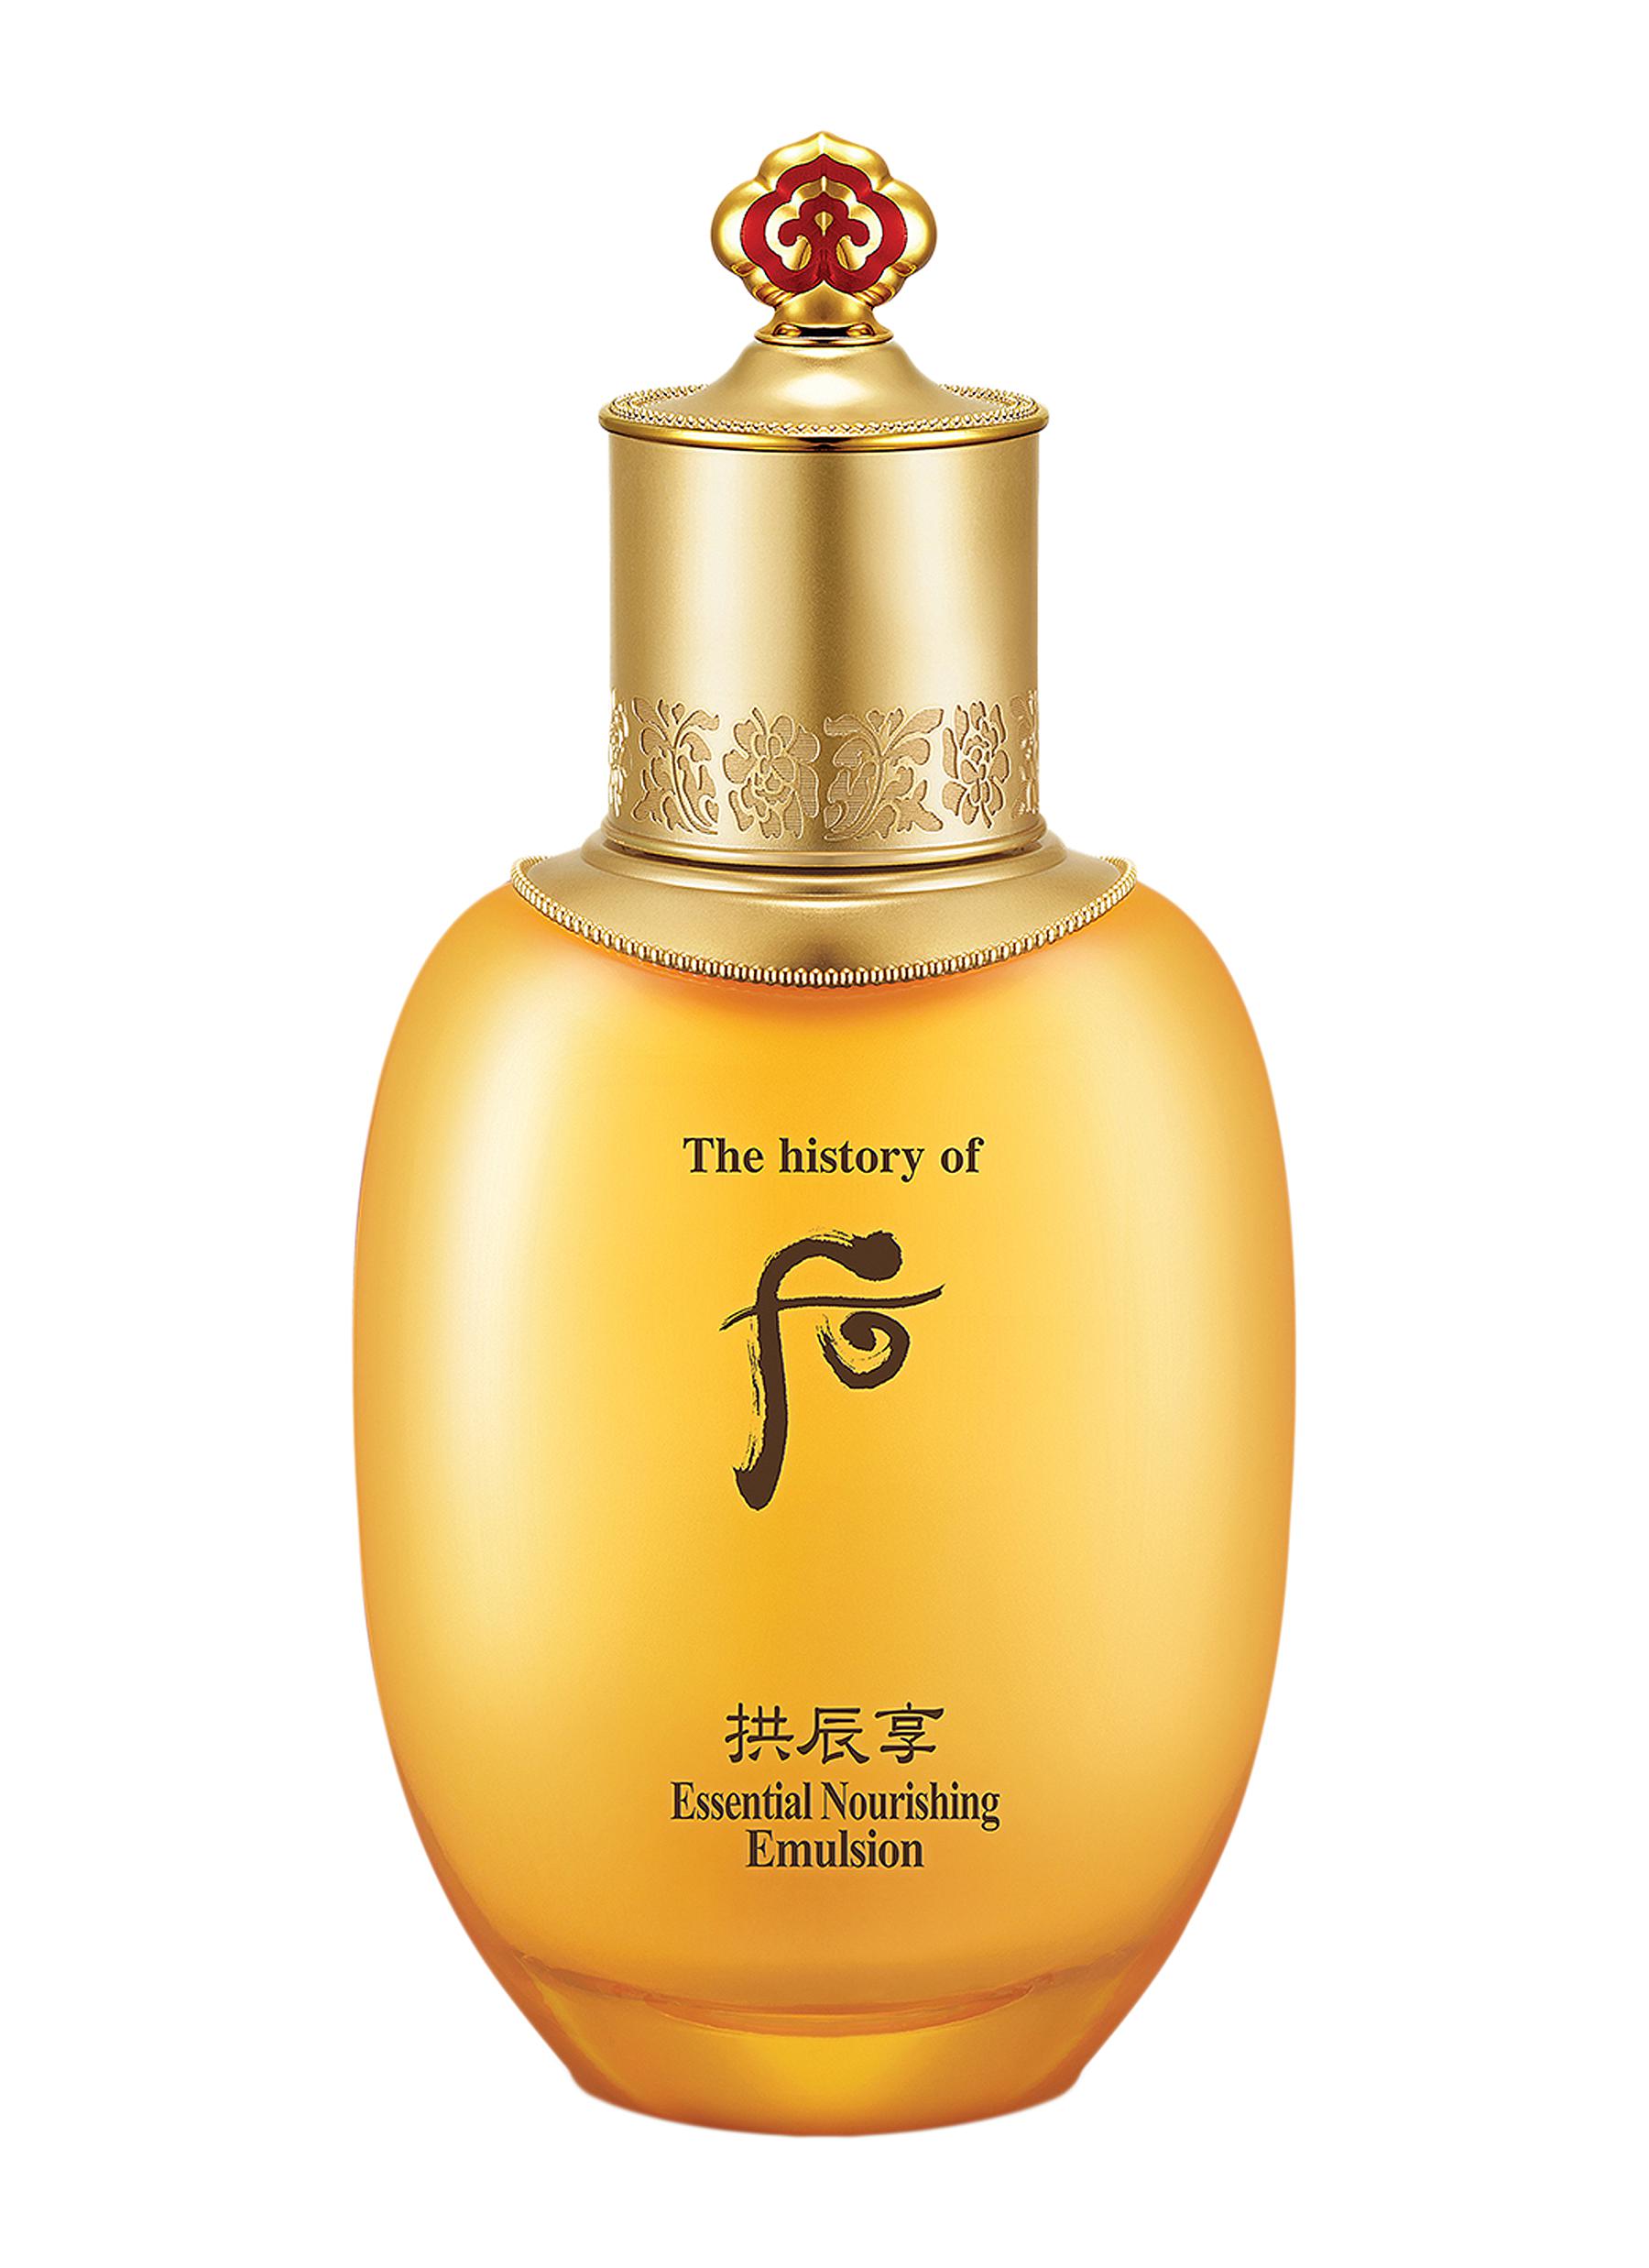 the history of whoo gongjinhyang